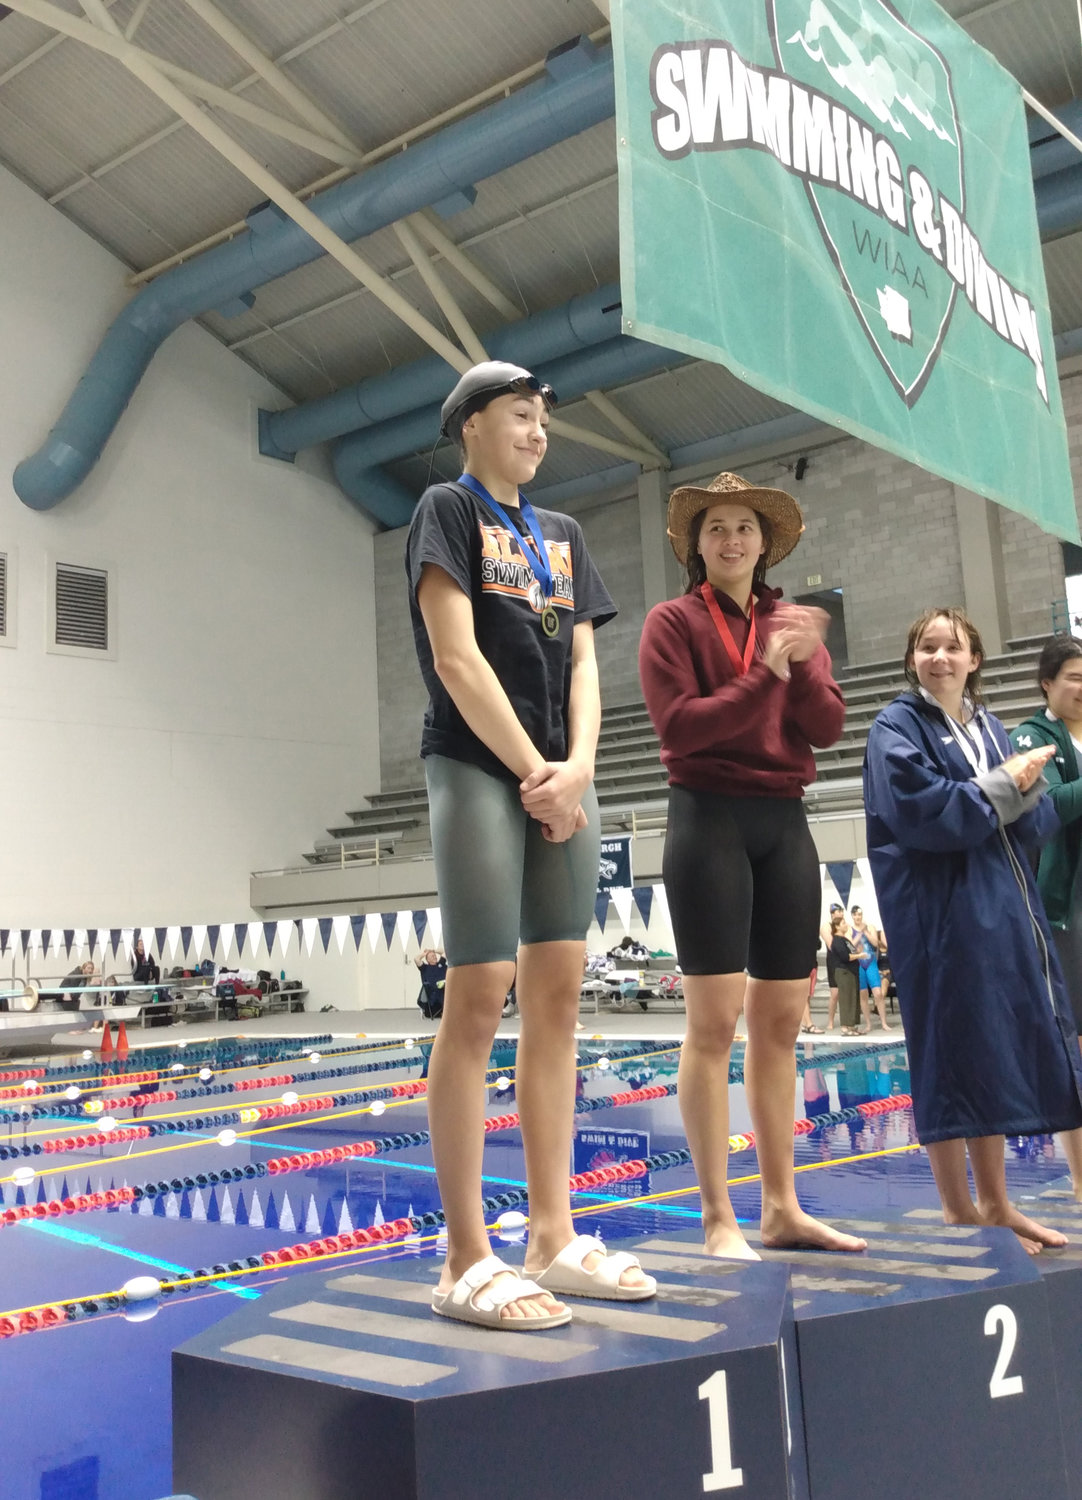 Blaine freshman Hailey Ferrell on the top step of the podium after winning the girls 2A 500 freestyle state championship November 12 at Weyerhaeuser King County Aquatics Center in Federal Way.